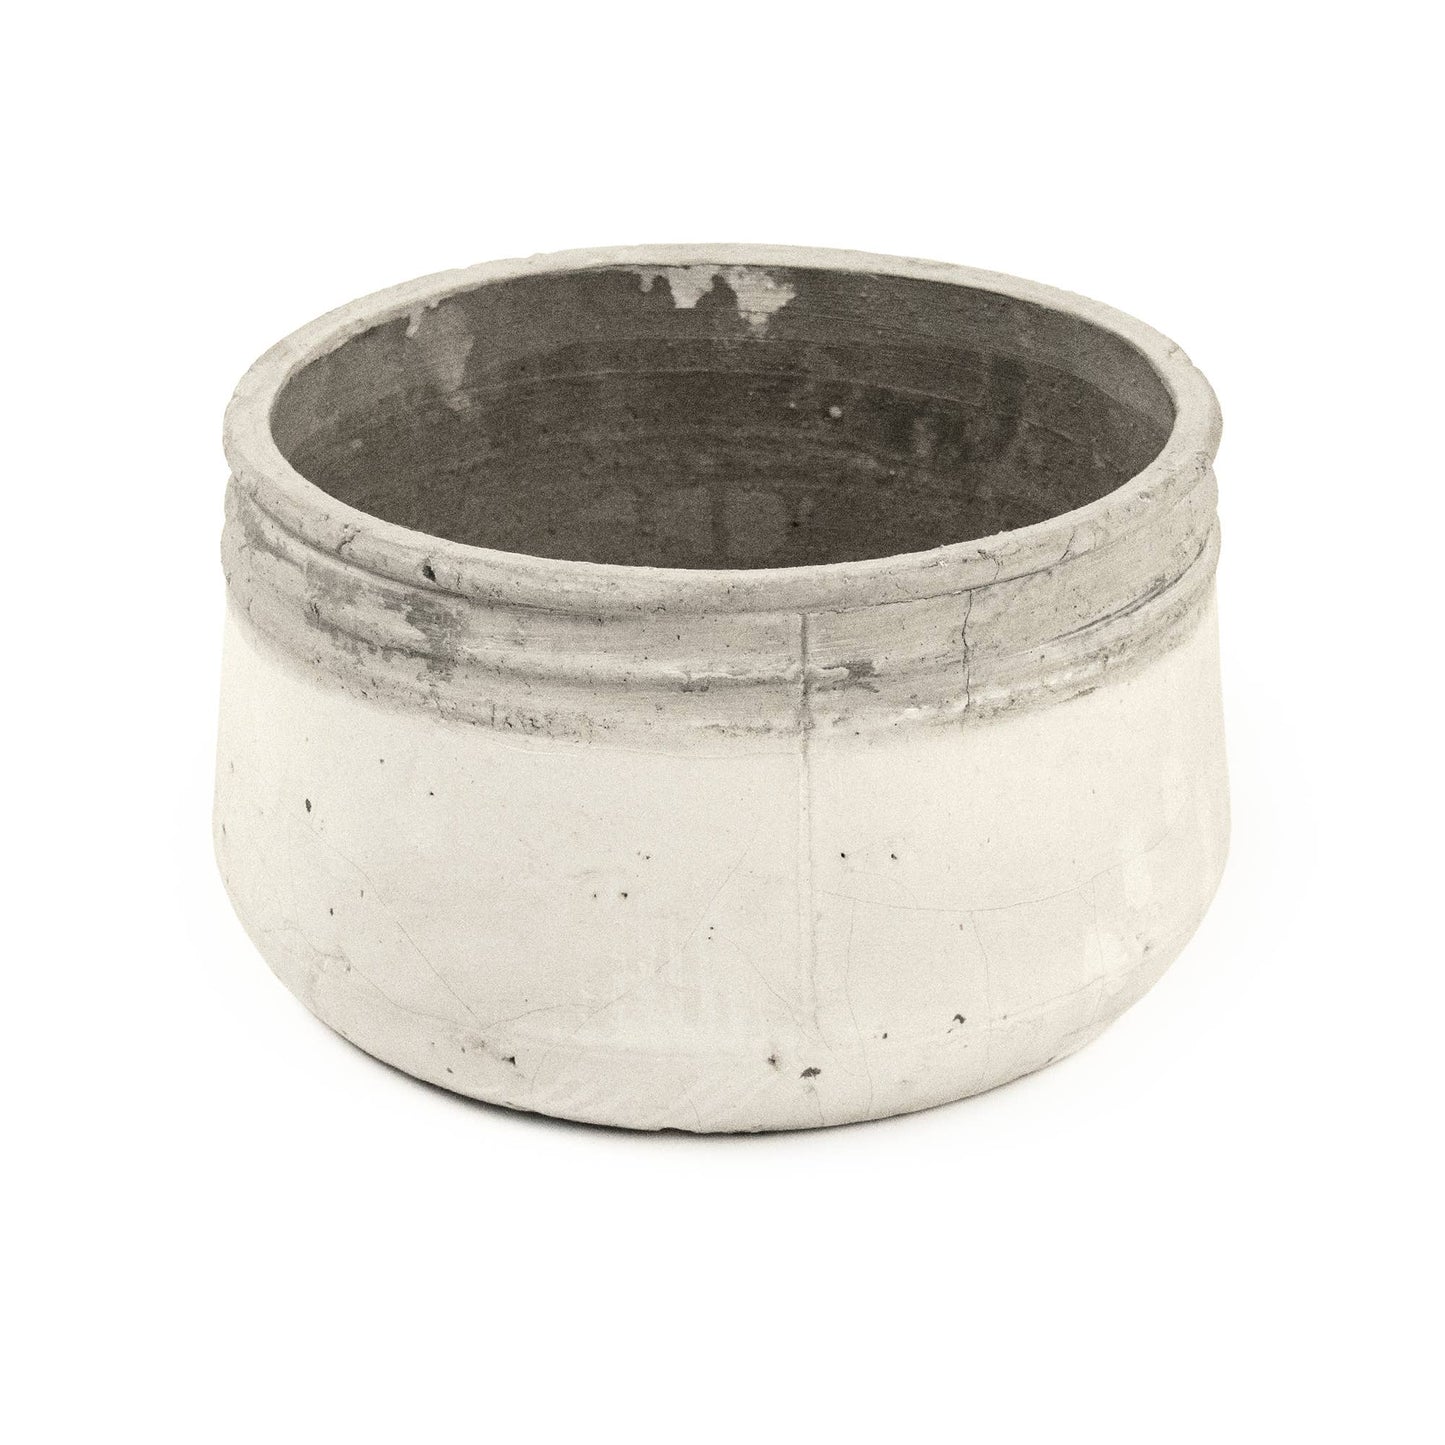 Distressed White Large Bowl Container